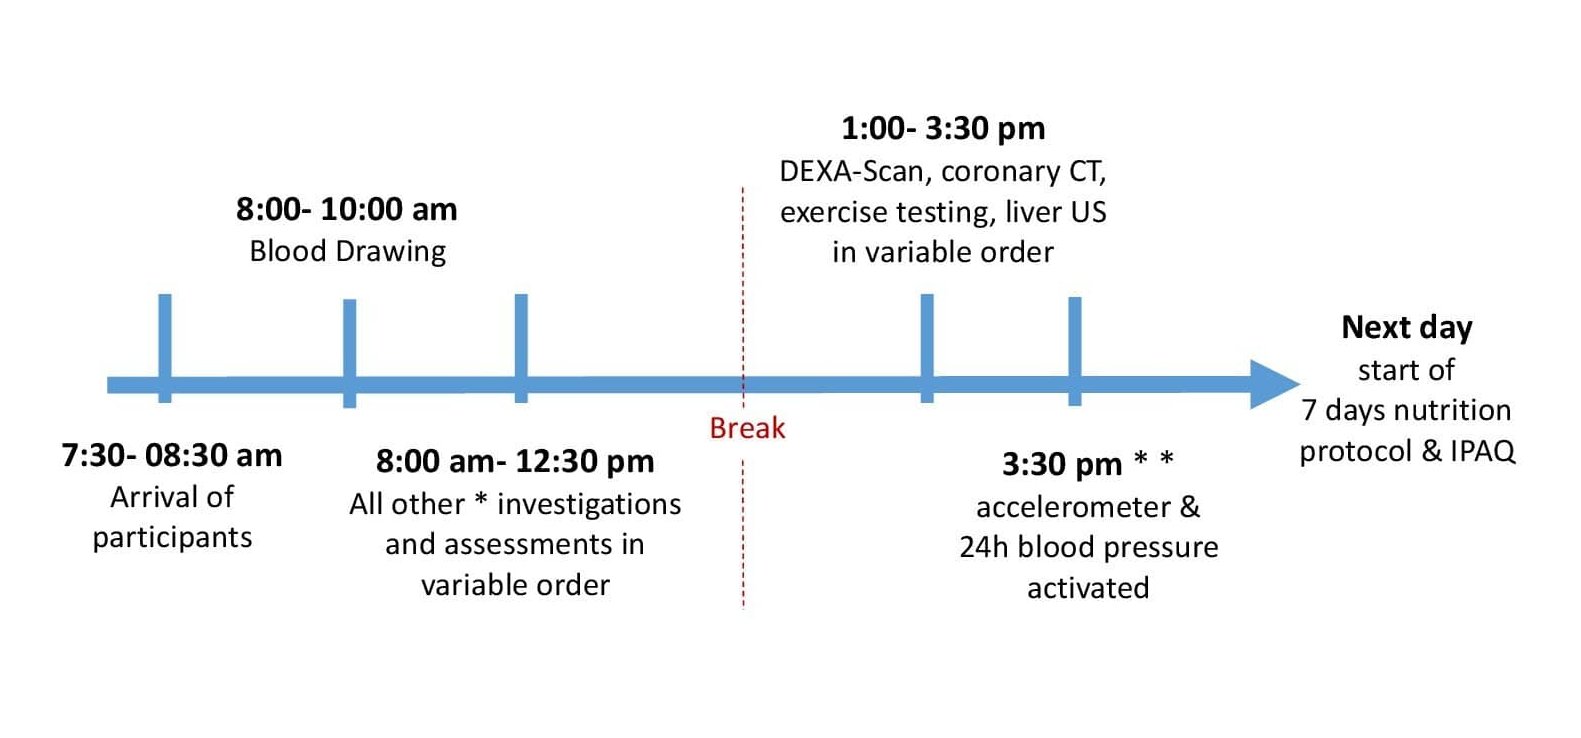 Fig. 3. Timeline of daily practice. DEXA= Dual Energy X-ray Absorptiometry, CT= Computed Tomography, US= Ultrasound, IPAQ= International Physical Activity Questionnaire. *All investigations except for DEXA Scan, coronary CT, exercise testing, liver US, 7 days nutrition protocol, IPAQ, accelerometer, 24h Blood pressure. * *Time might be variable, up to the next day. This depended on participants’ personal reasons.